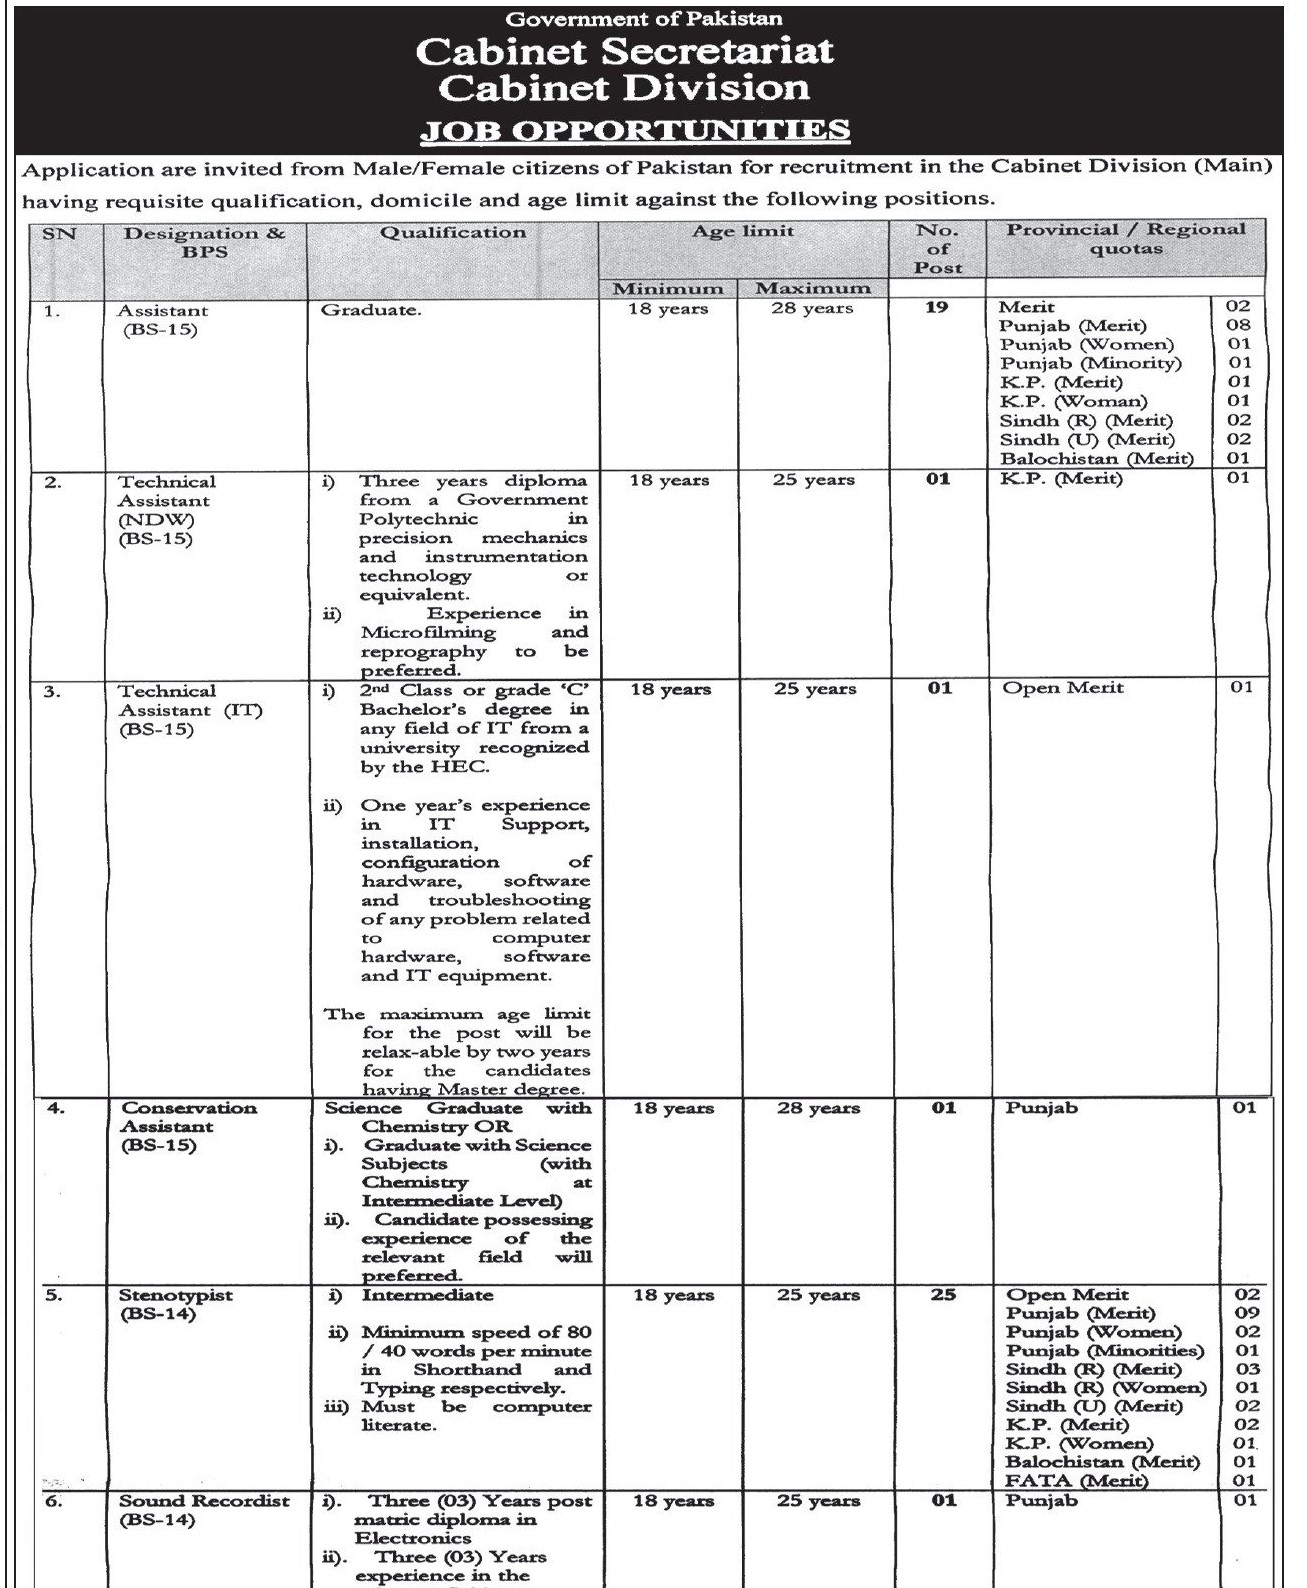 BPS-01 to BPS-15 Vacancies in Cabinet Secretariat Cabinet Division